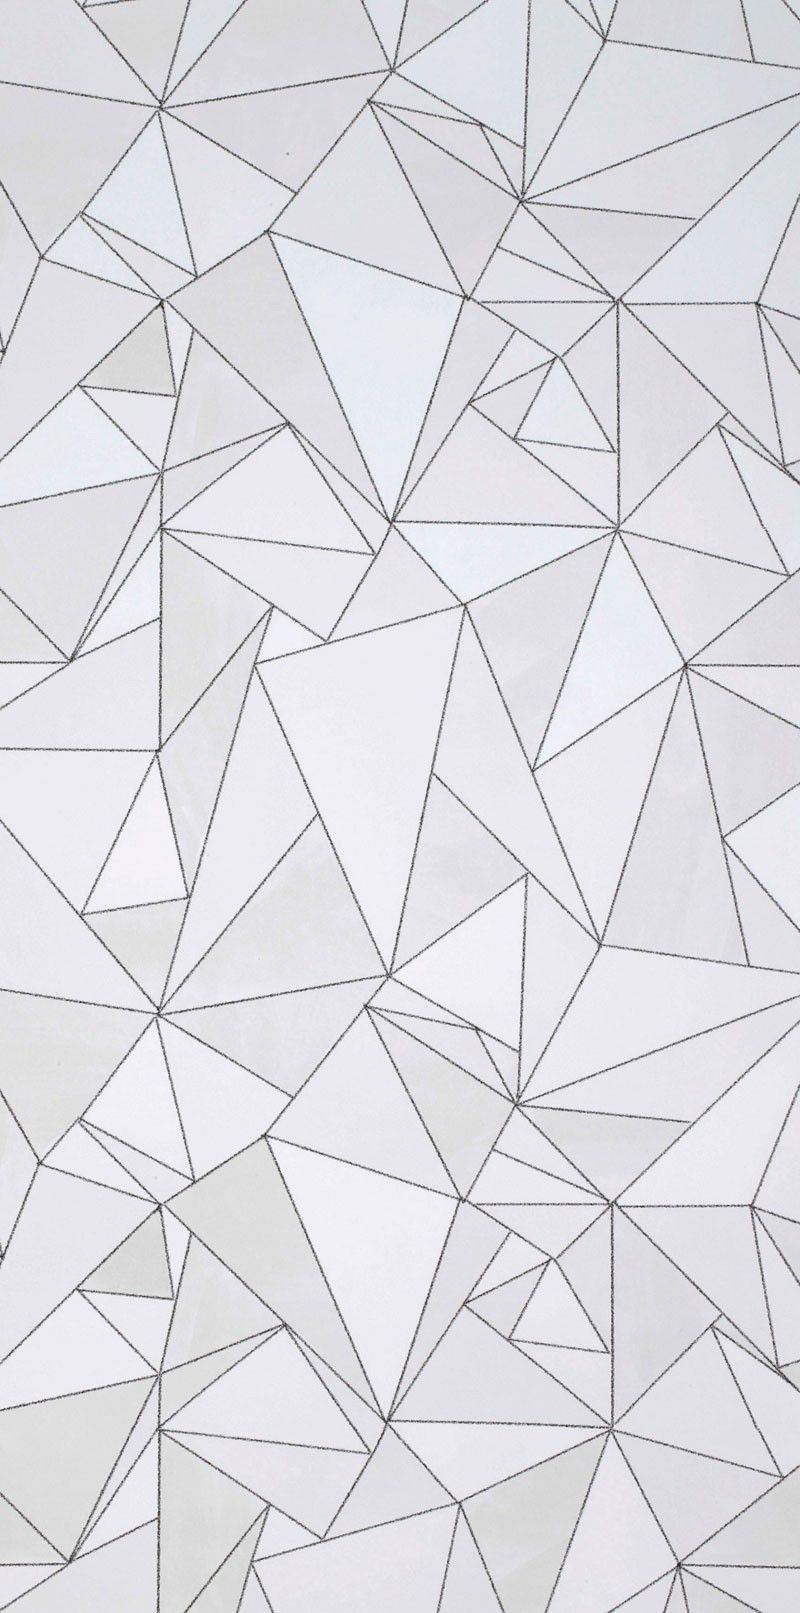 wallpaper origami pencil – from Mimou, Sweden